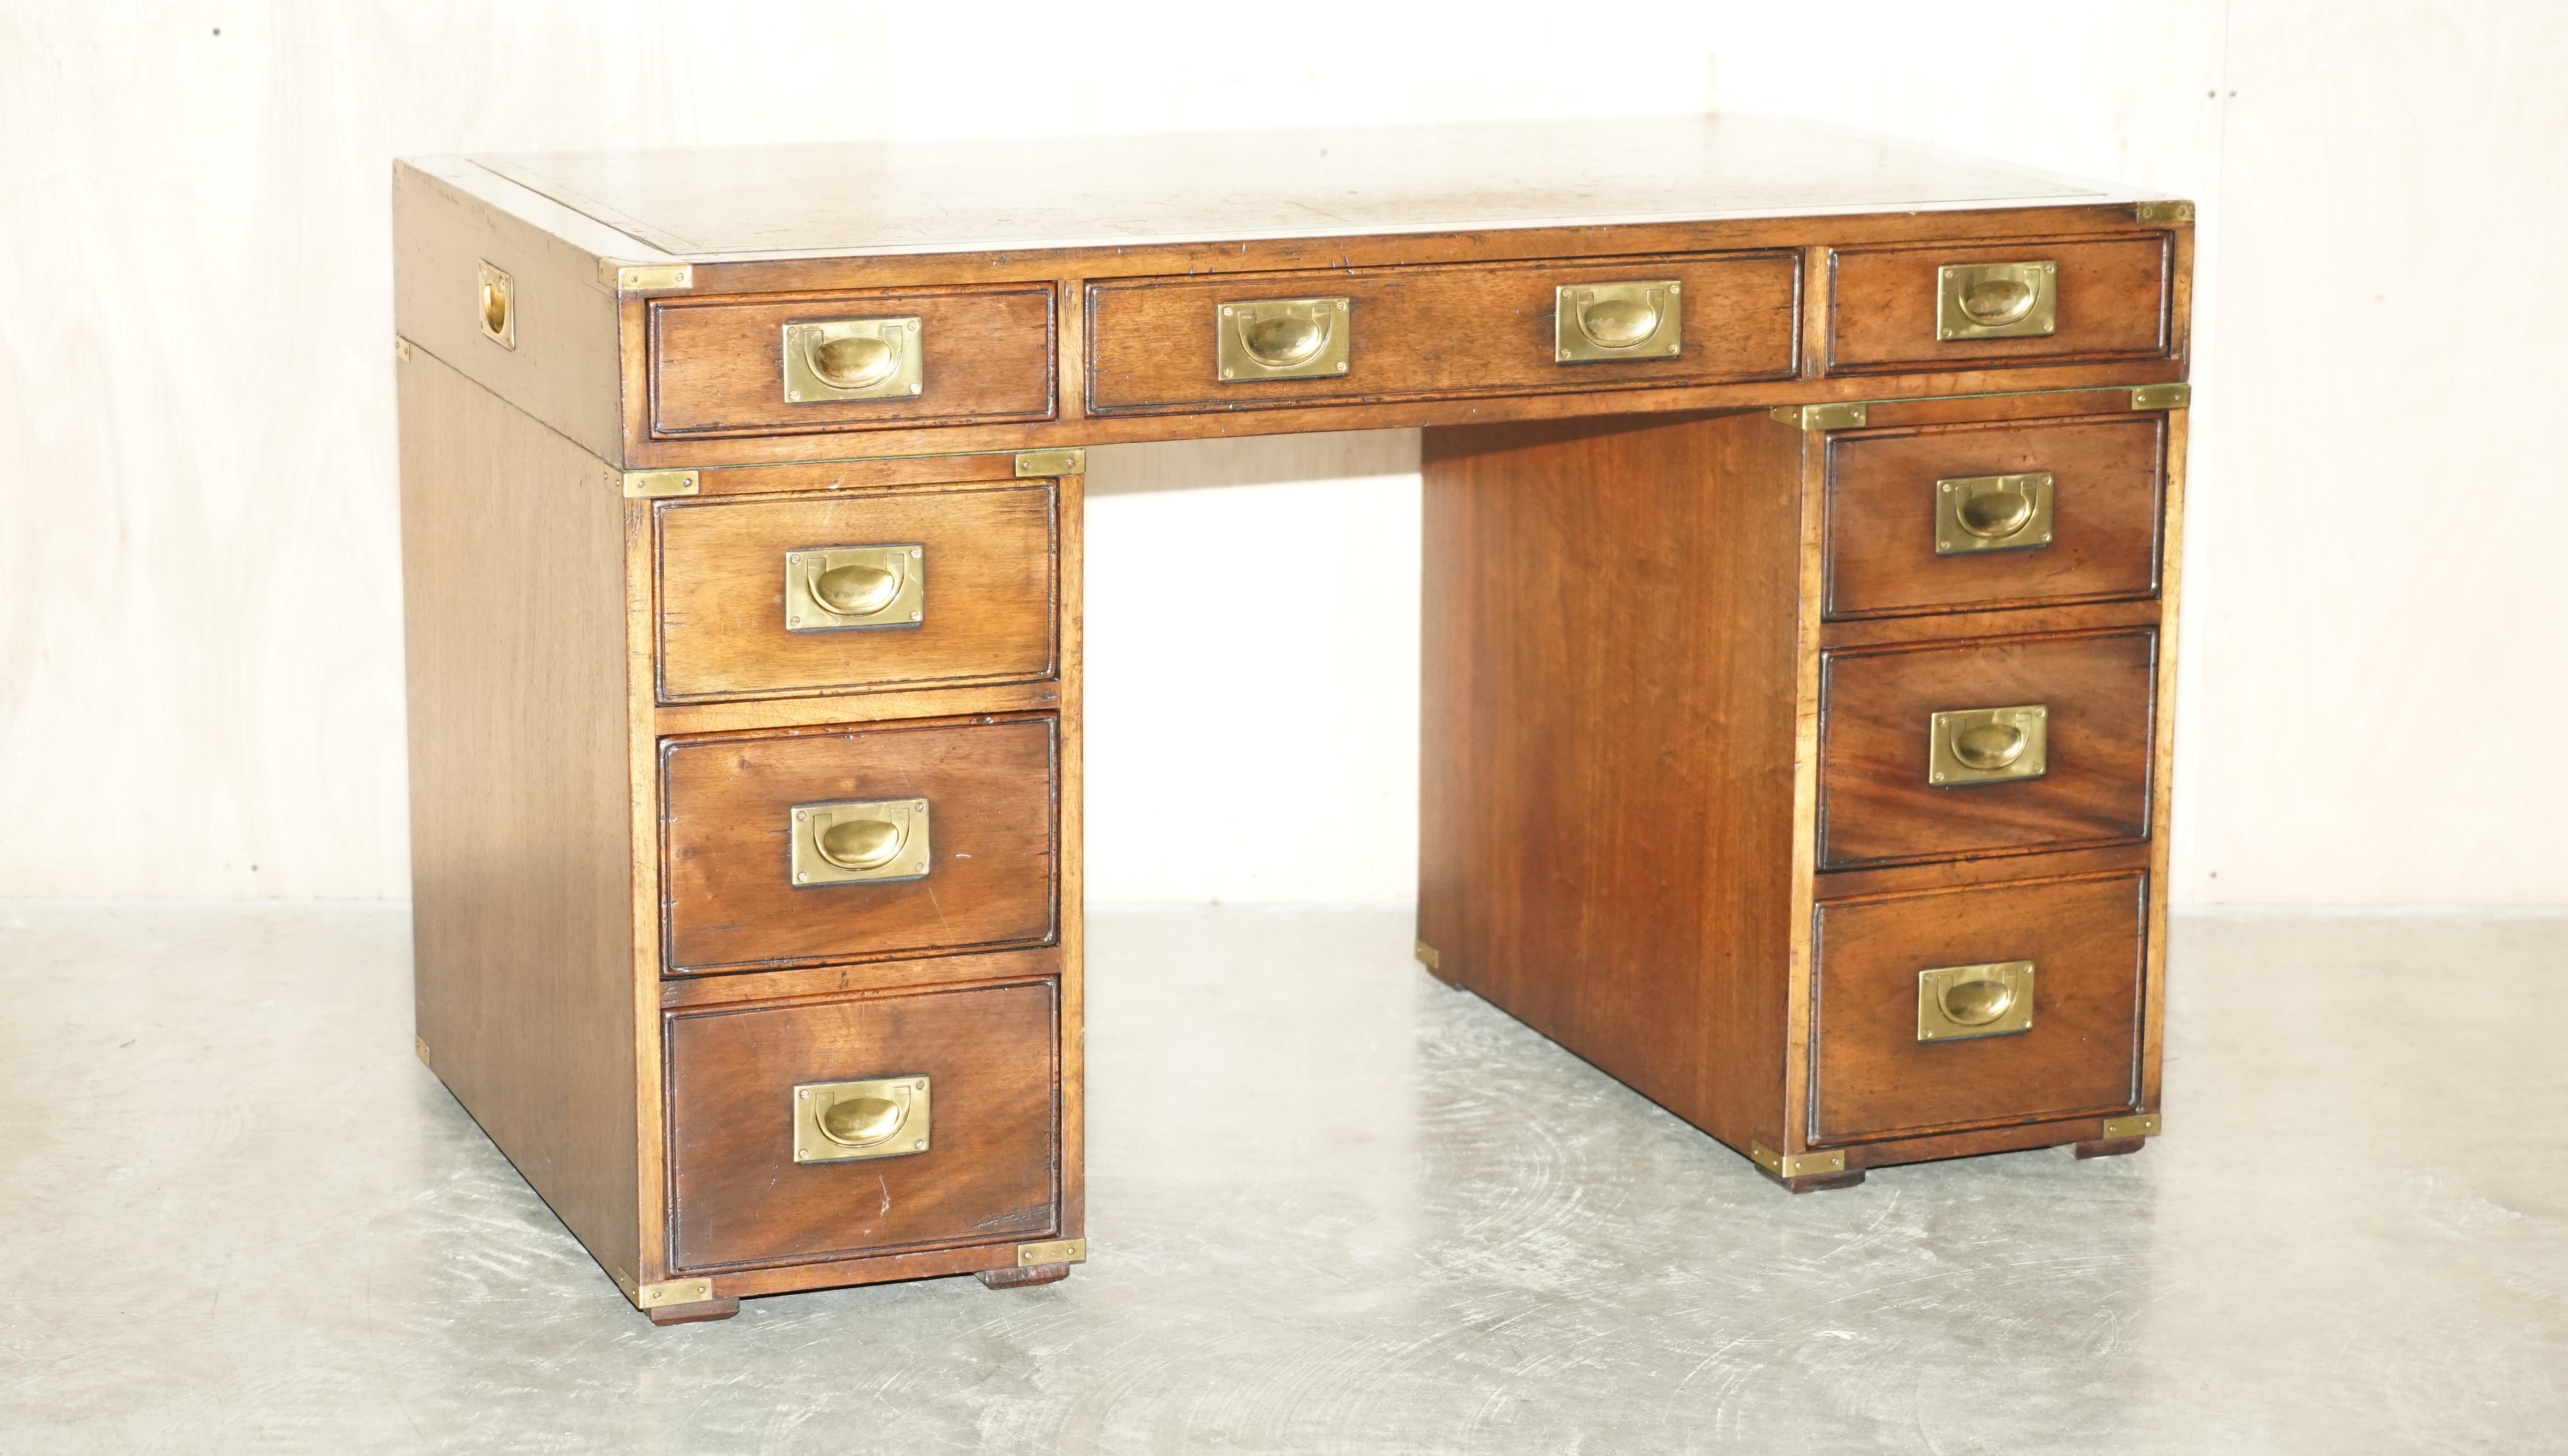 Royal House Antiques

Royal House Antiques is delighted to offer for sale this lovely vintage, Harrods London retailed, REH Kennedy made, Military Campaign twin pedestal partners desk with green leather writing surface

Please note the delivery fee